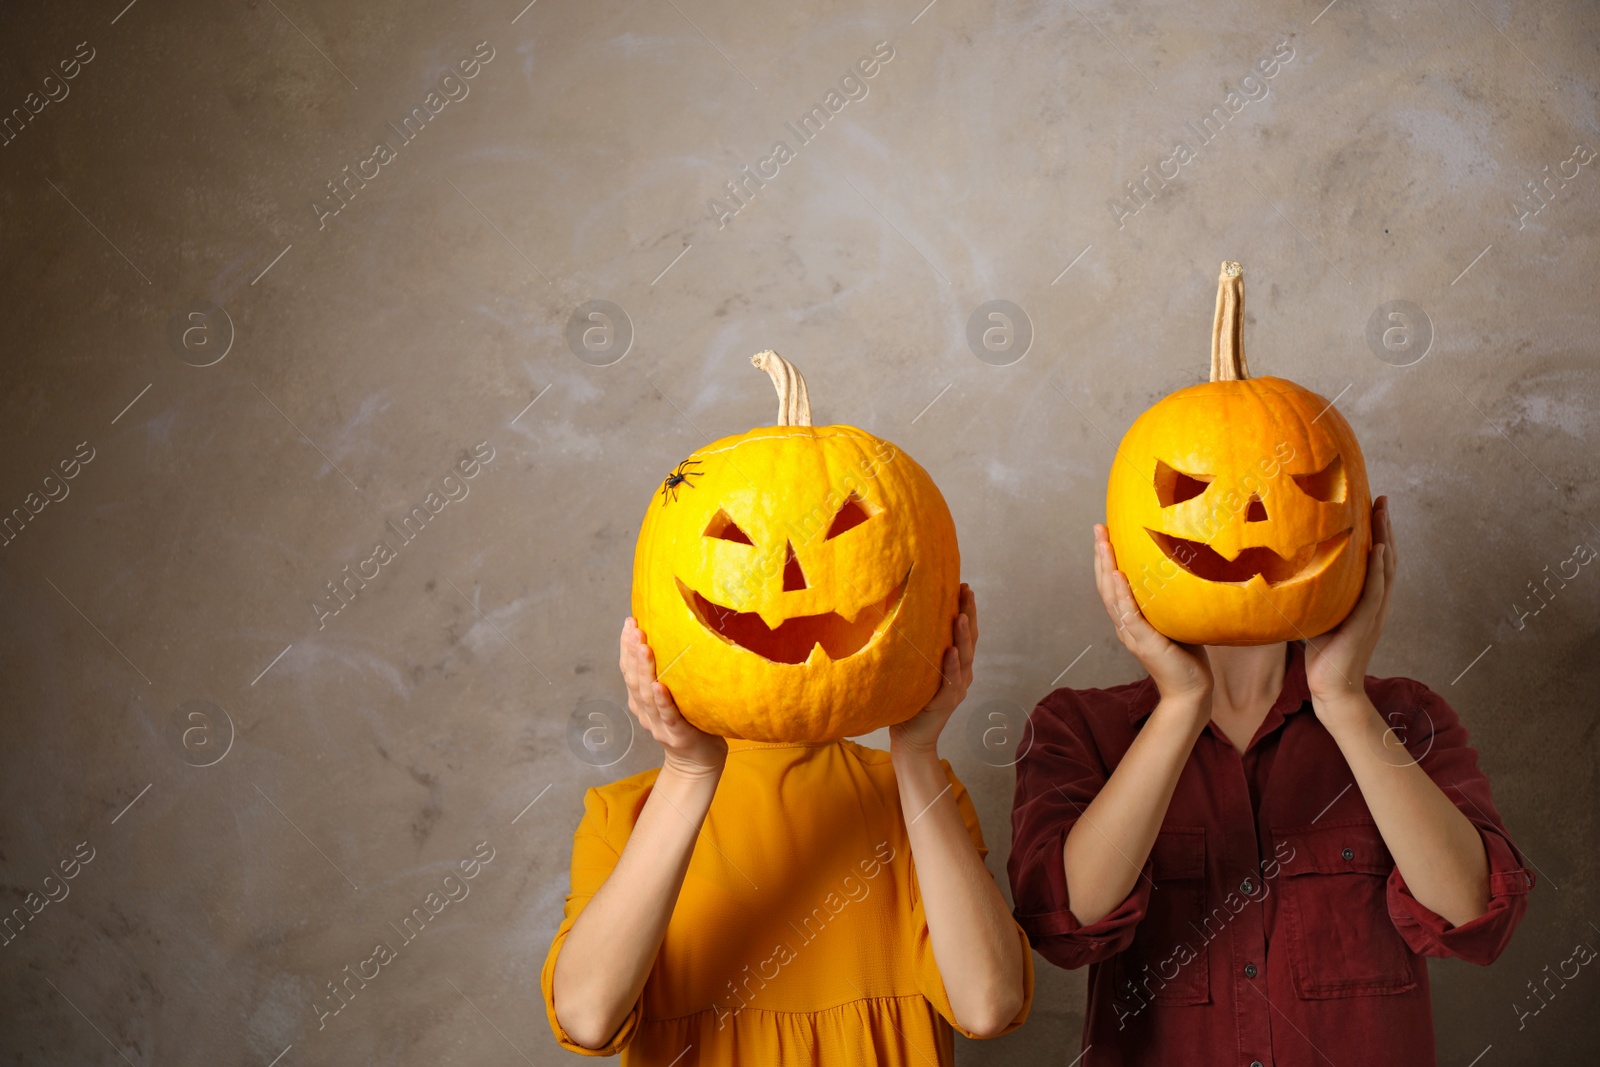 Photo of Women with pumpkin heads against beige background, space for text. Jack lantern - traditional Halloween decor